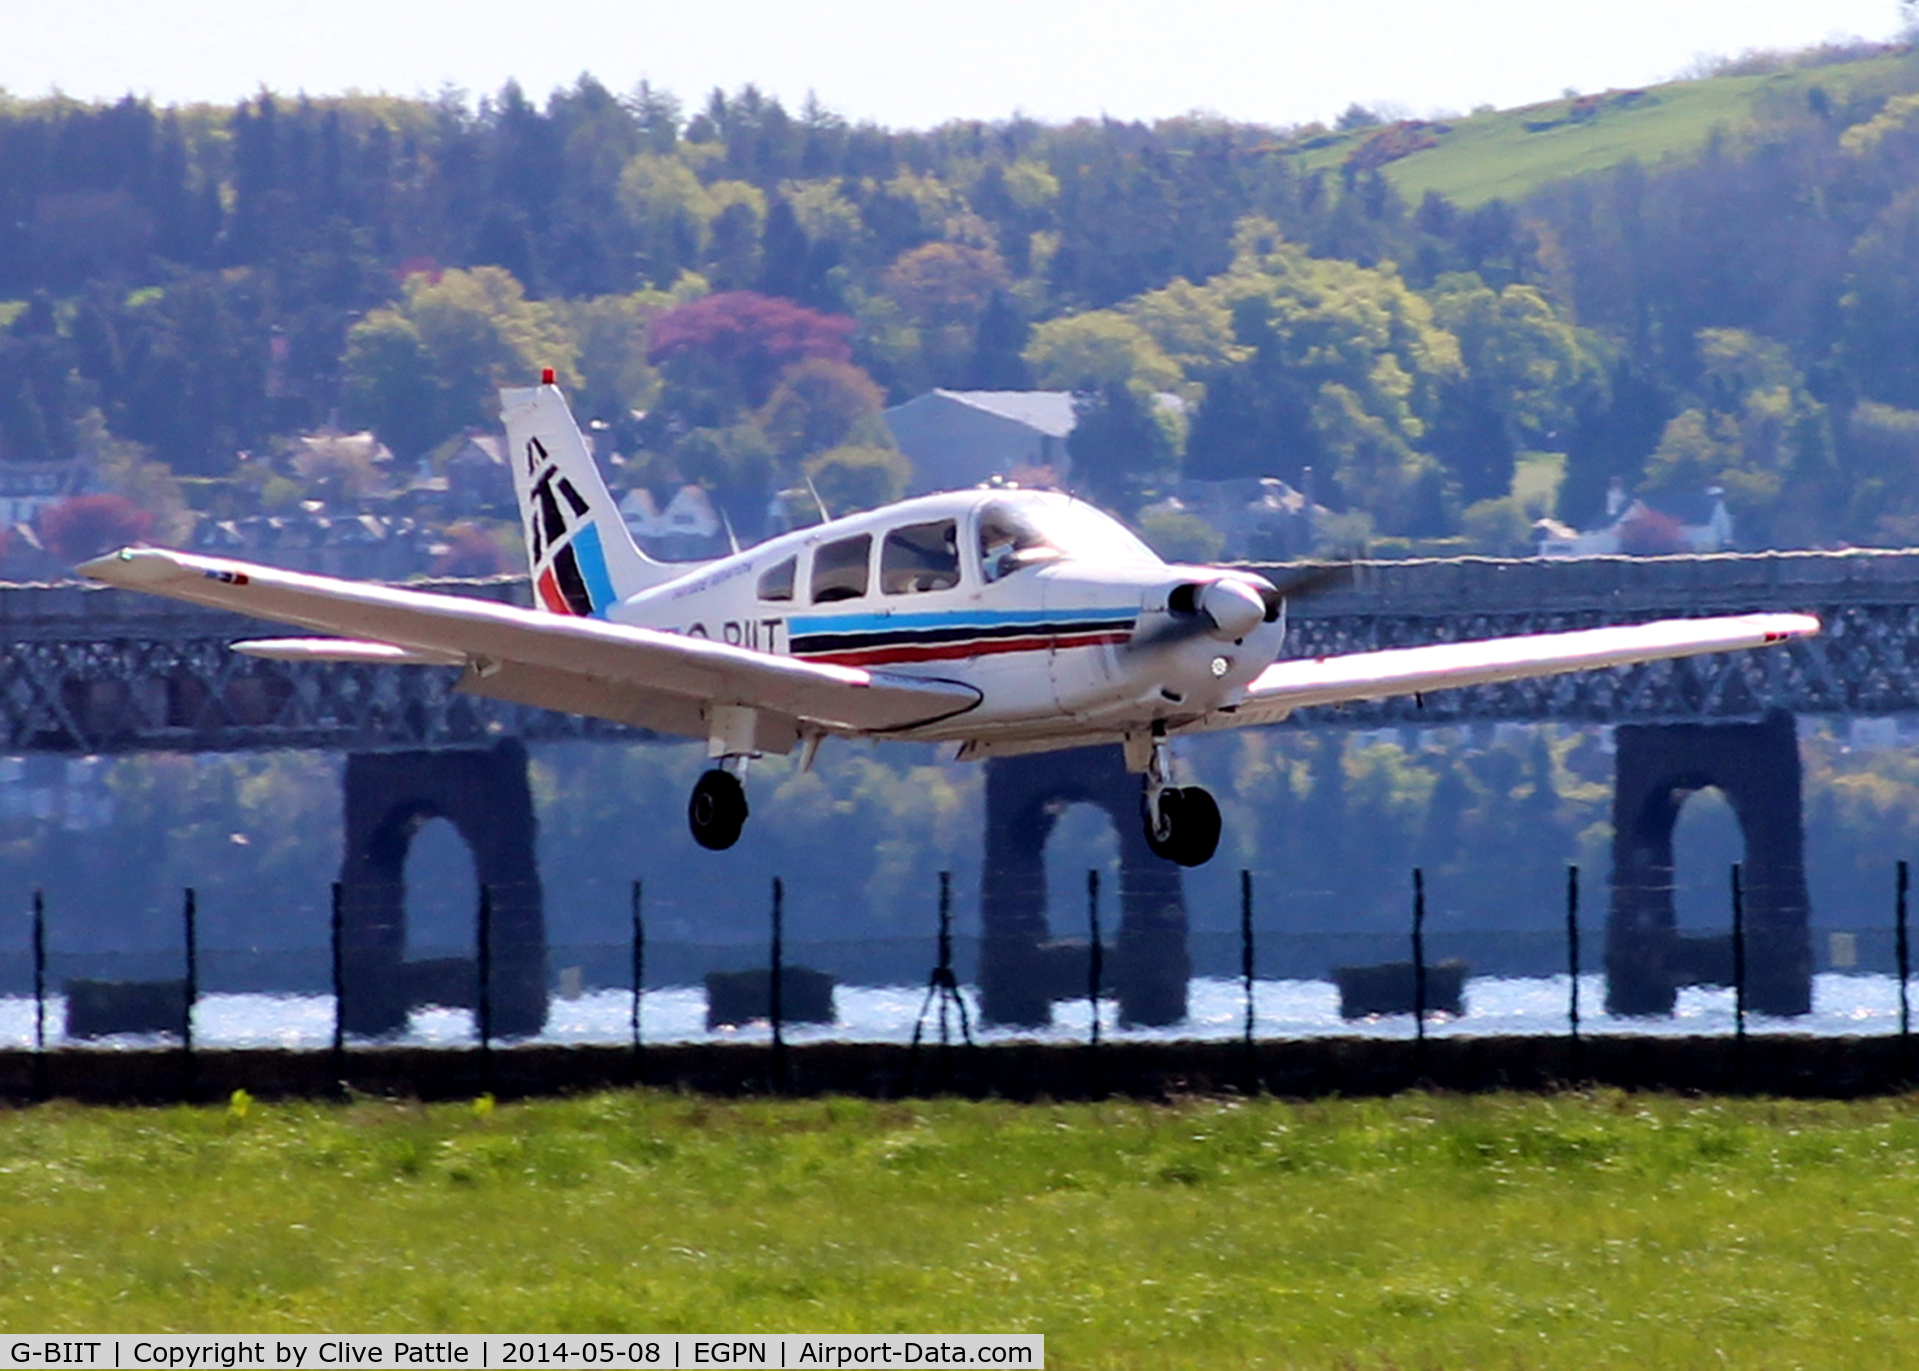 G-BIIT, 1980 Piper PA-28-161 Cherokee Warrior II C/N 28-8116052, Tayside Aviation, landing at Dundee Riverside Airport EGPN with the Tay Bridge in the background.